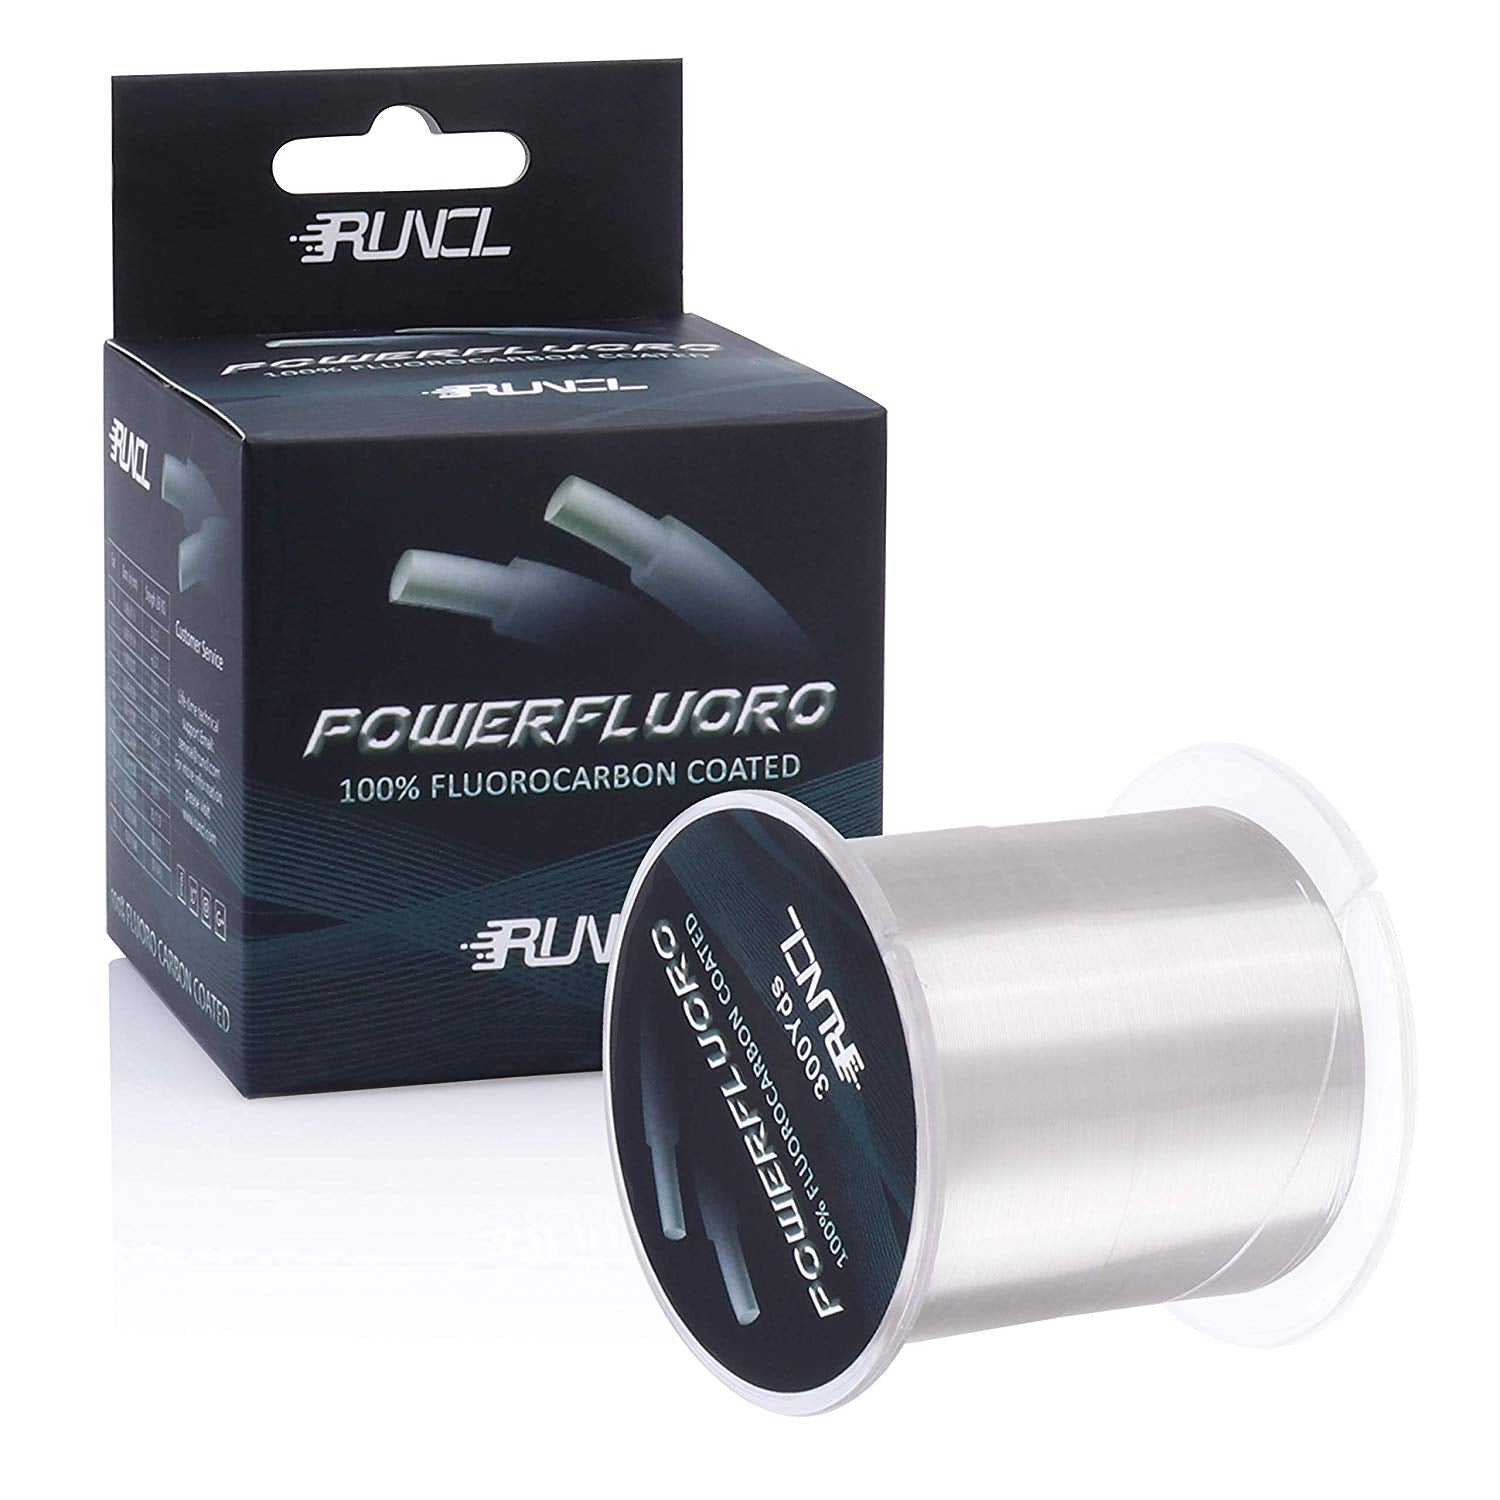 RUNCL Fluorocarbon Fishing Line, PowerFluoro Clear Fishing Leader Line -  Virtually Invisible, Faster Sinking, Extra Sensitivity, 300-1000yds, 5-32lb